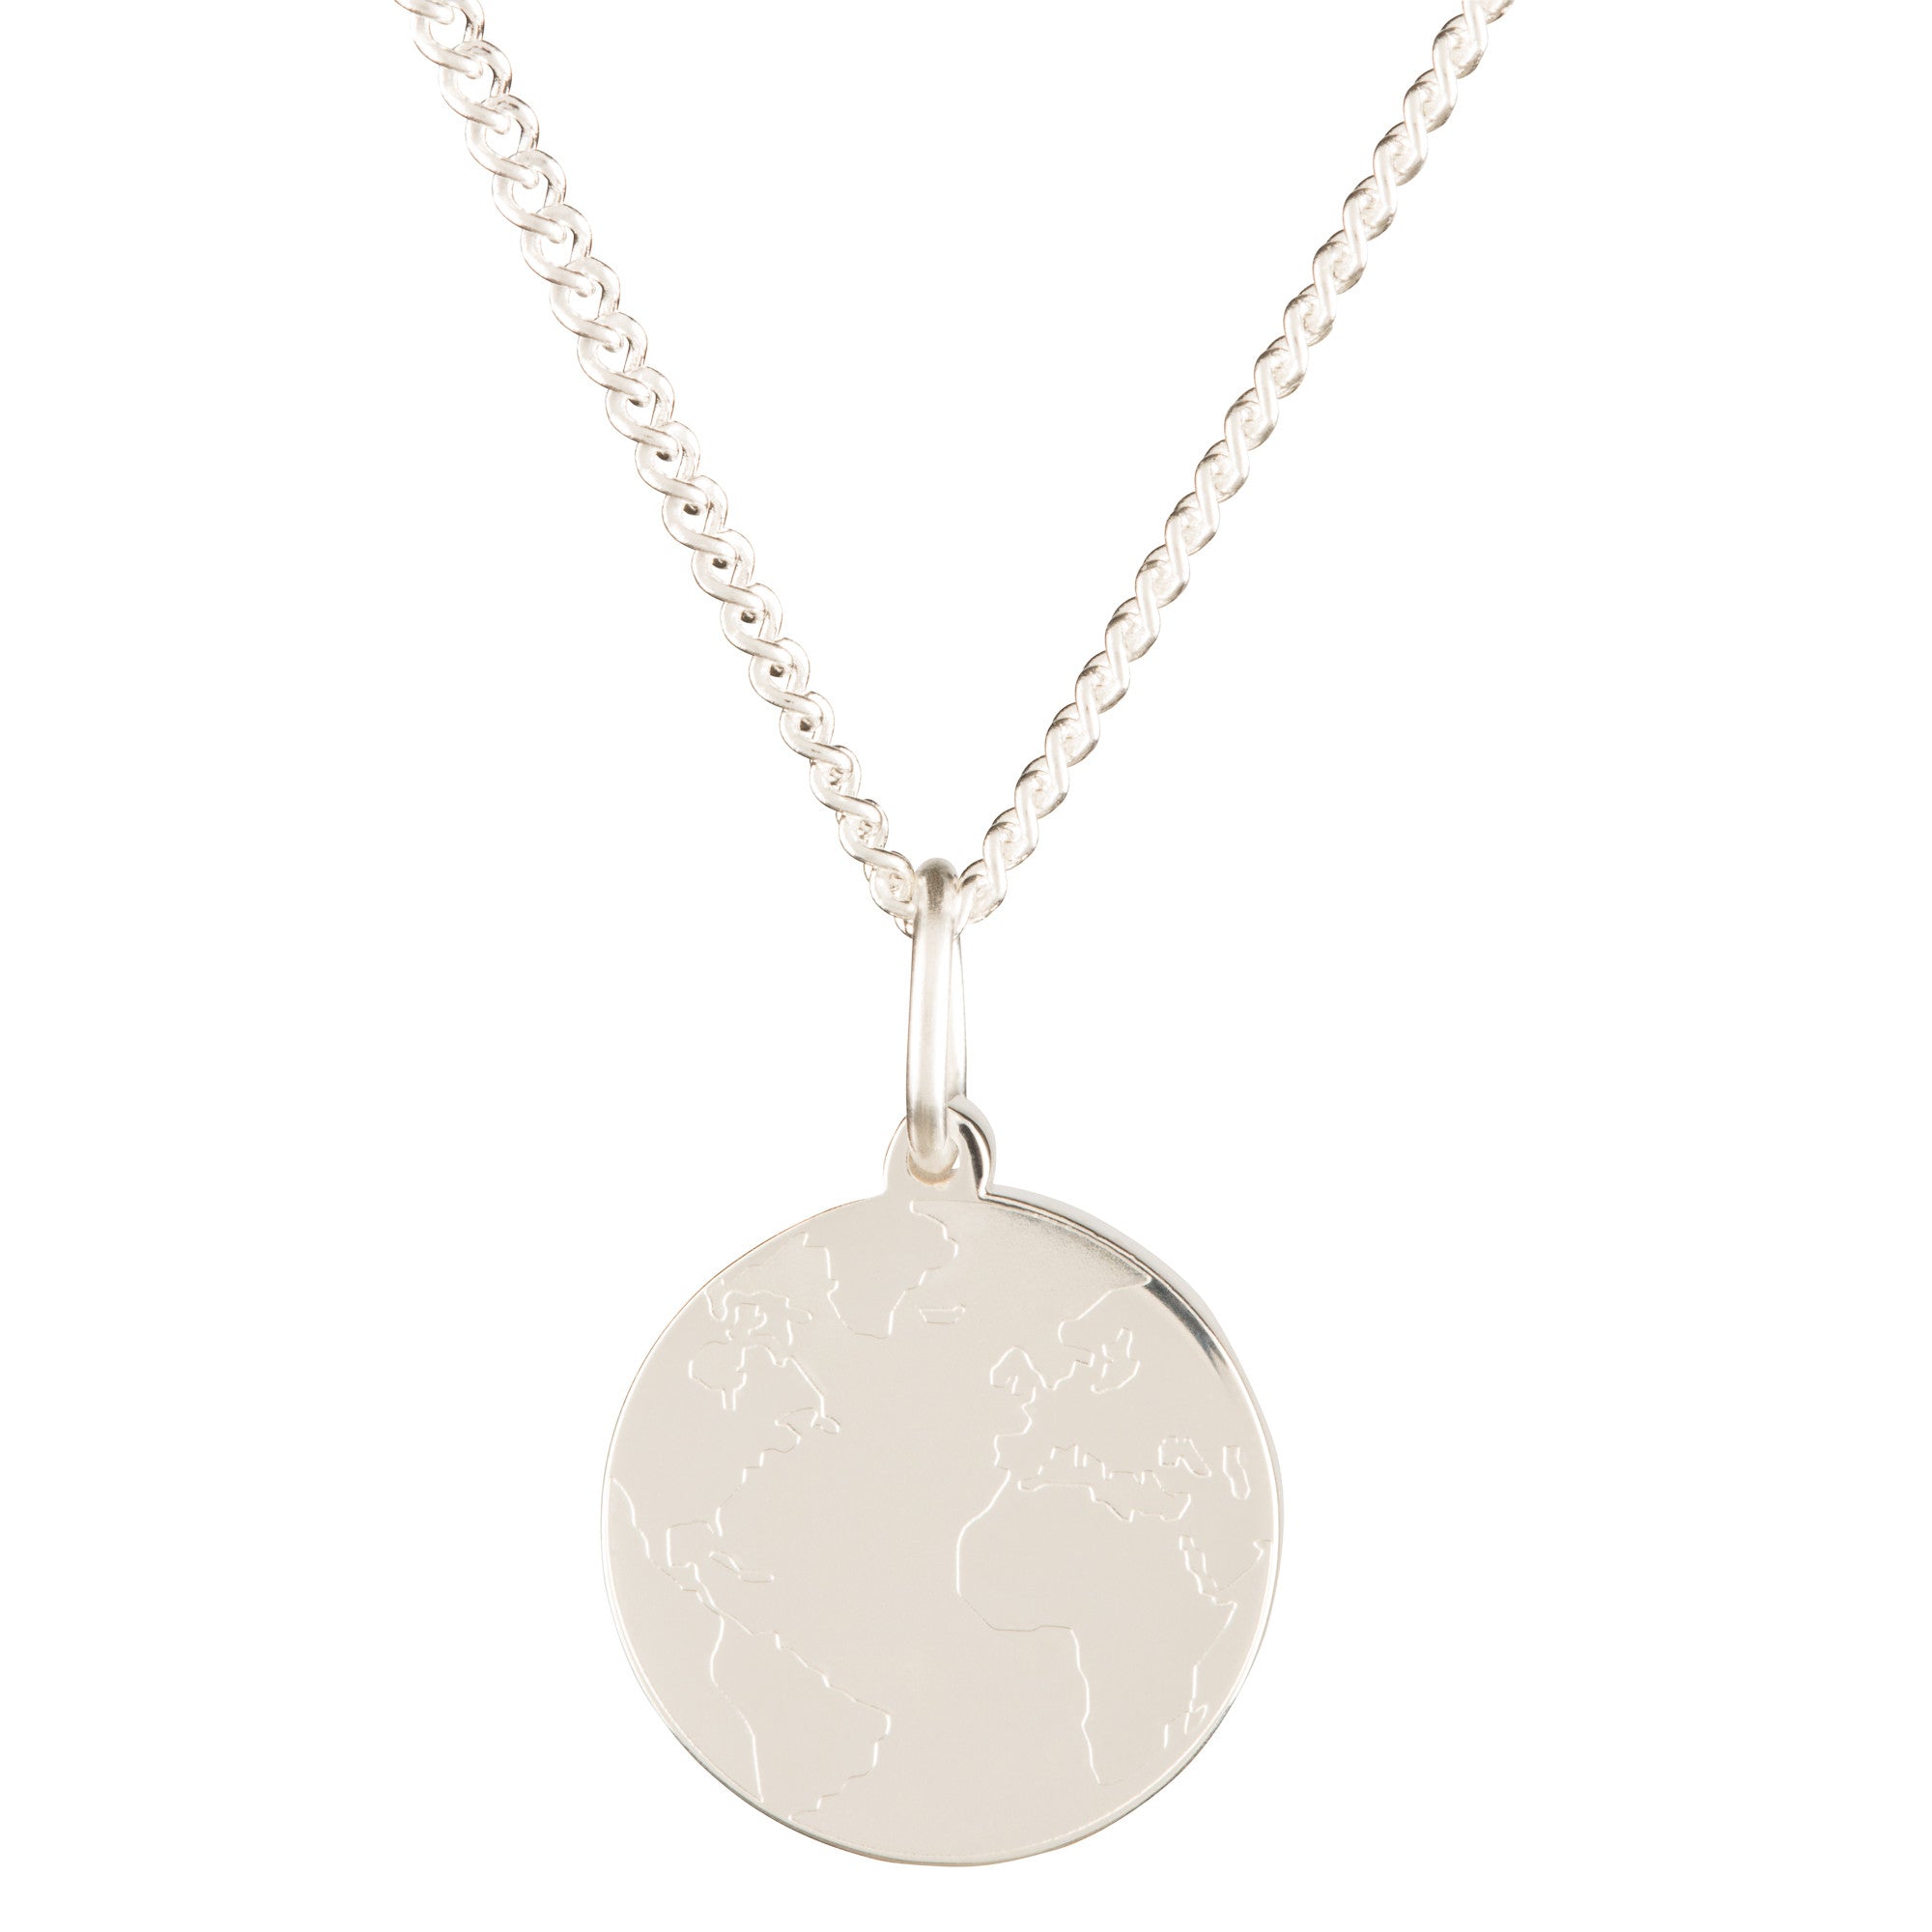 By-Ortiz, THE-WORLD-necklace, World-Necklace, World-Map-Necklace, World-Pendent, 18k-Gold